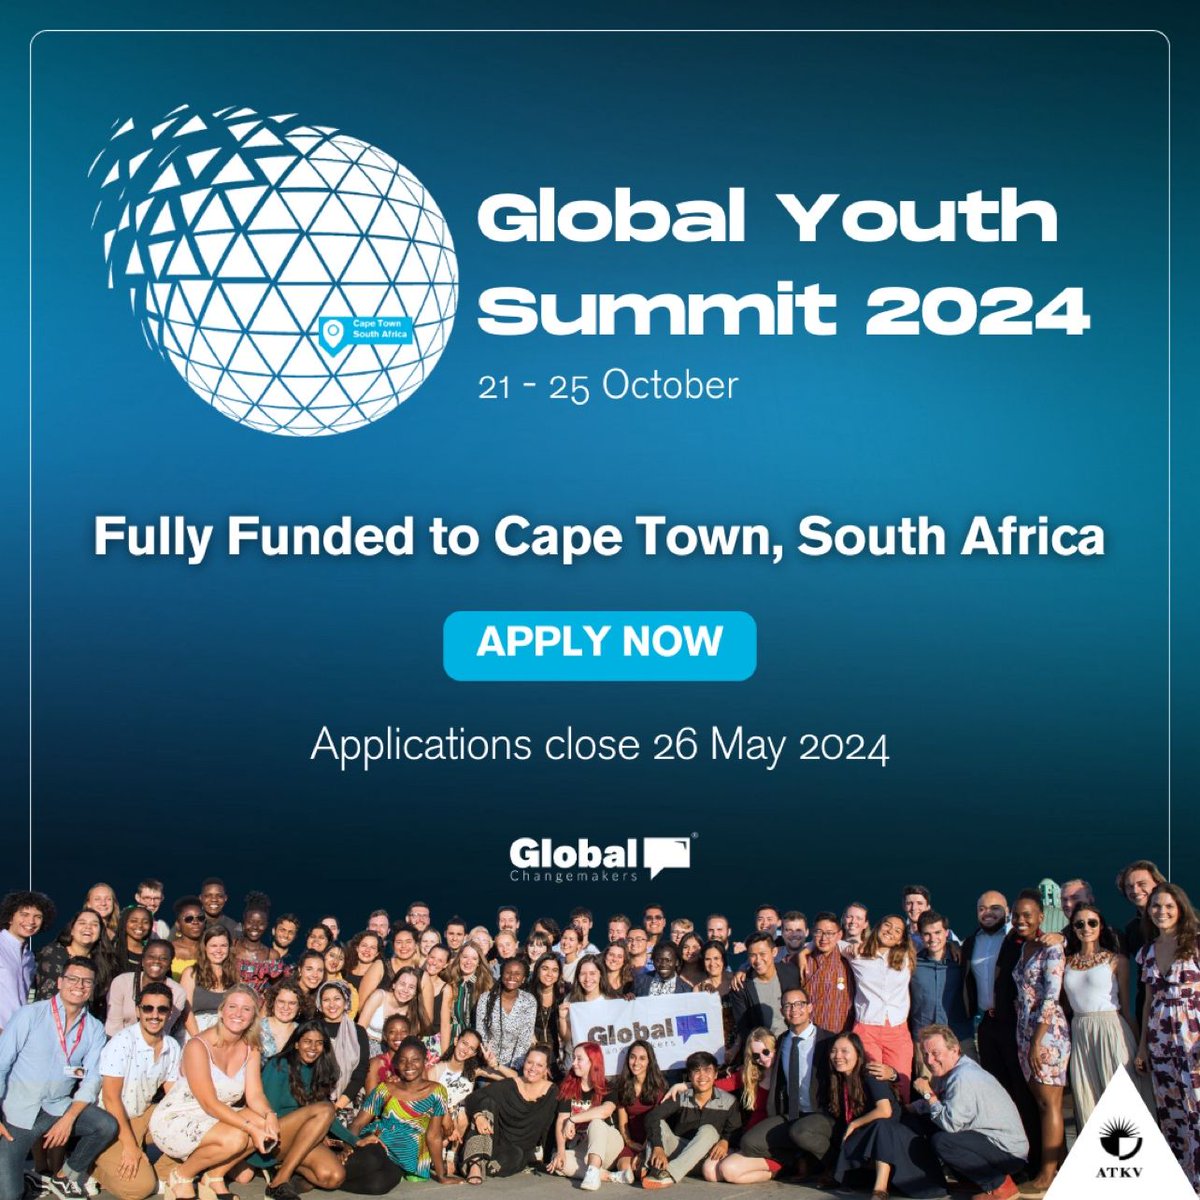 🌍📷 Apply now for the #FullyFunded Global Youth Summit 2024 in Cape Town, South Africa by Global Changemakers! Network with inspiring youth leaders, develop essential skills and make a positive impact. Deadline: May 26 📷shorturl.at/NO012

#GlobalYouthSummit @WeAreGCM